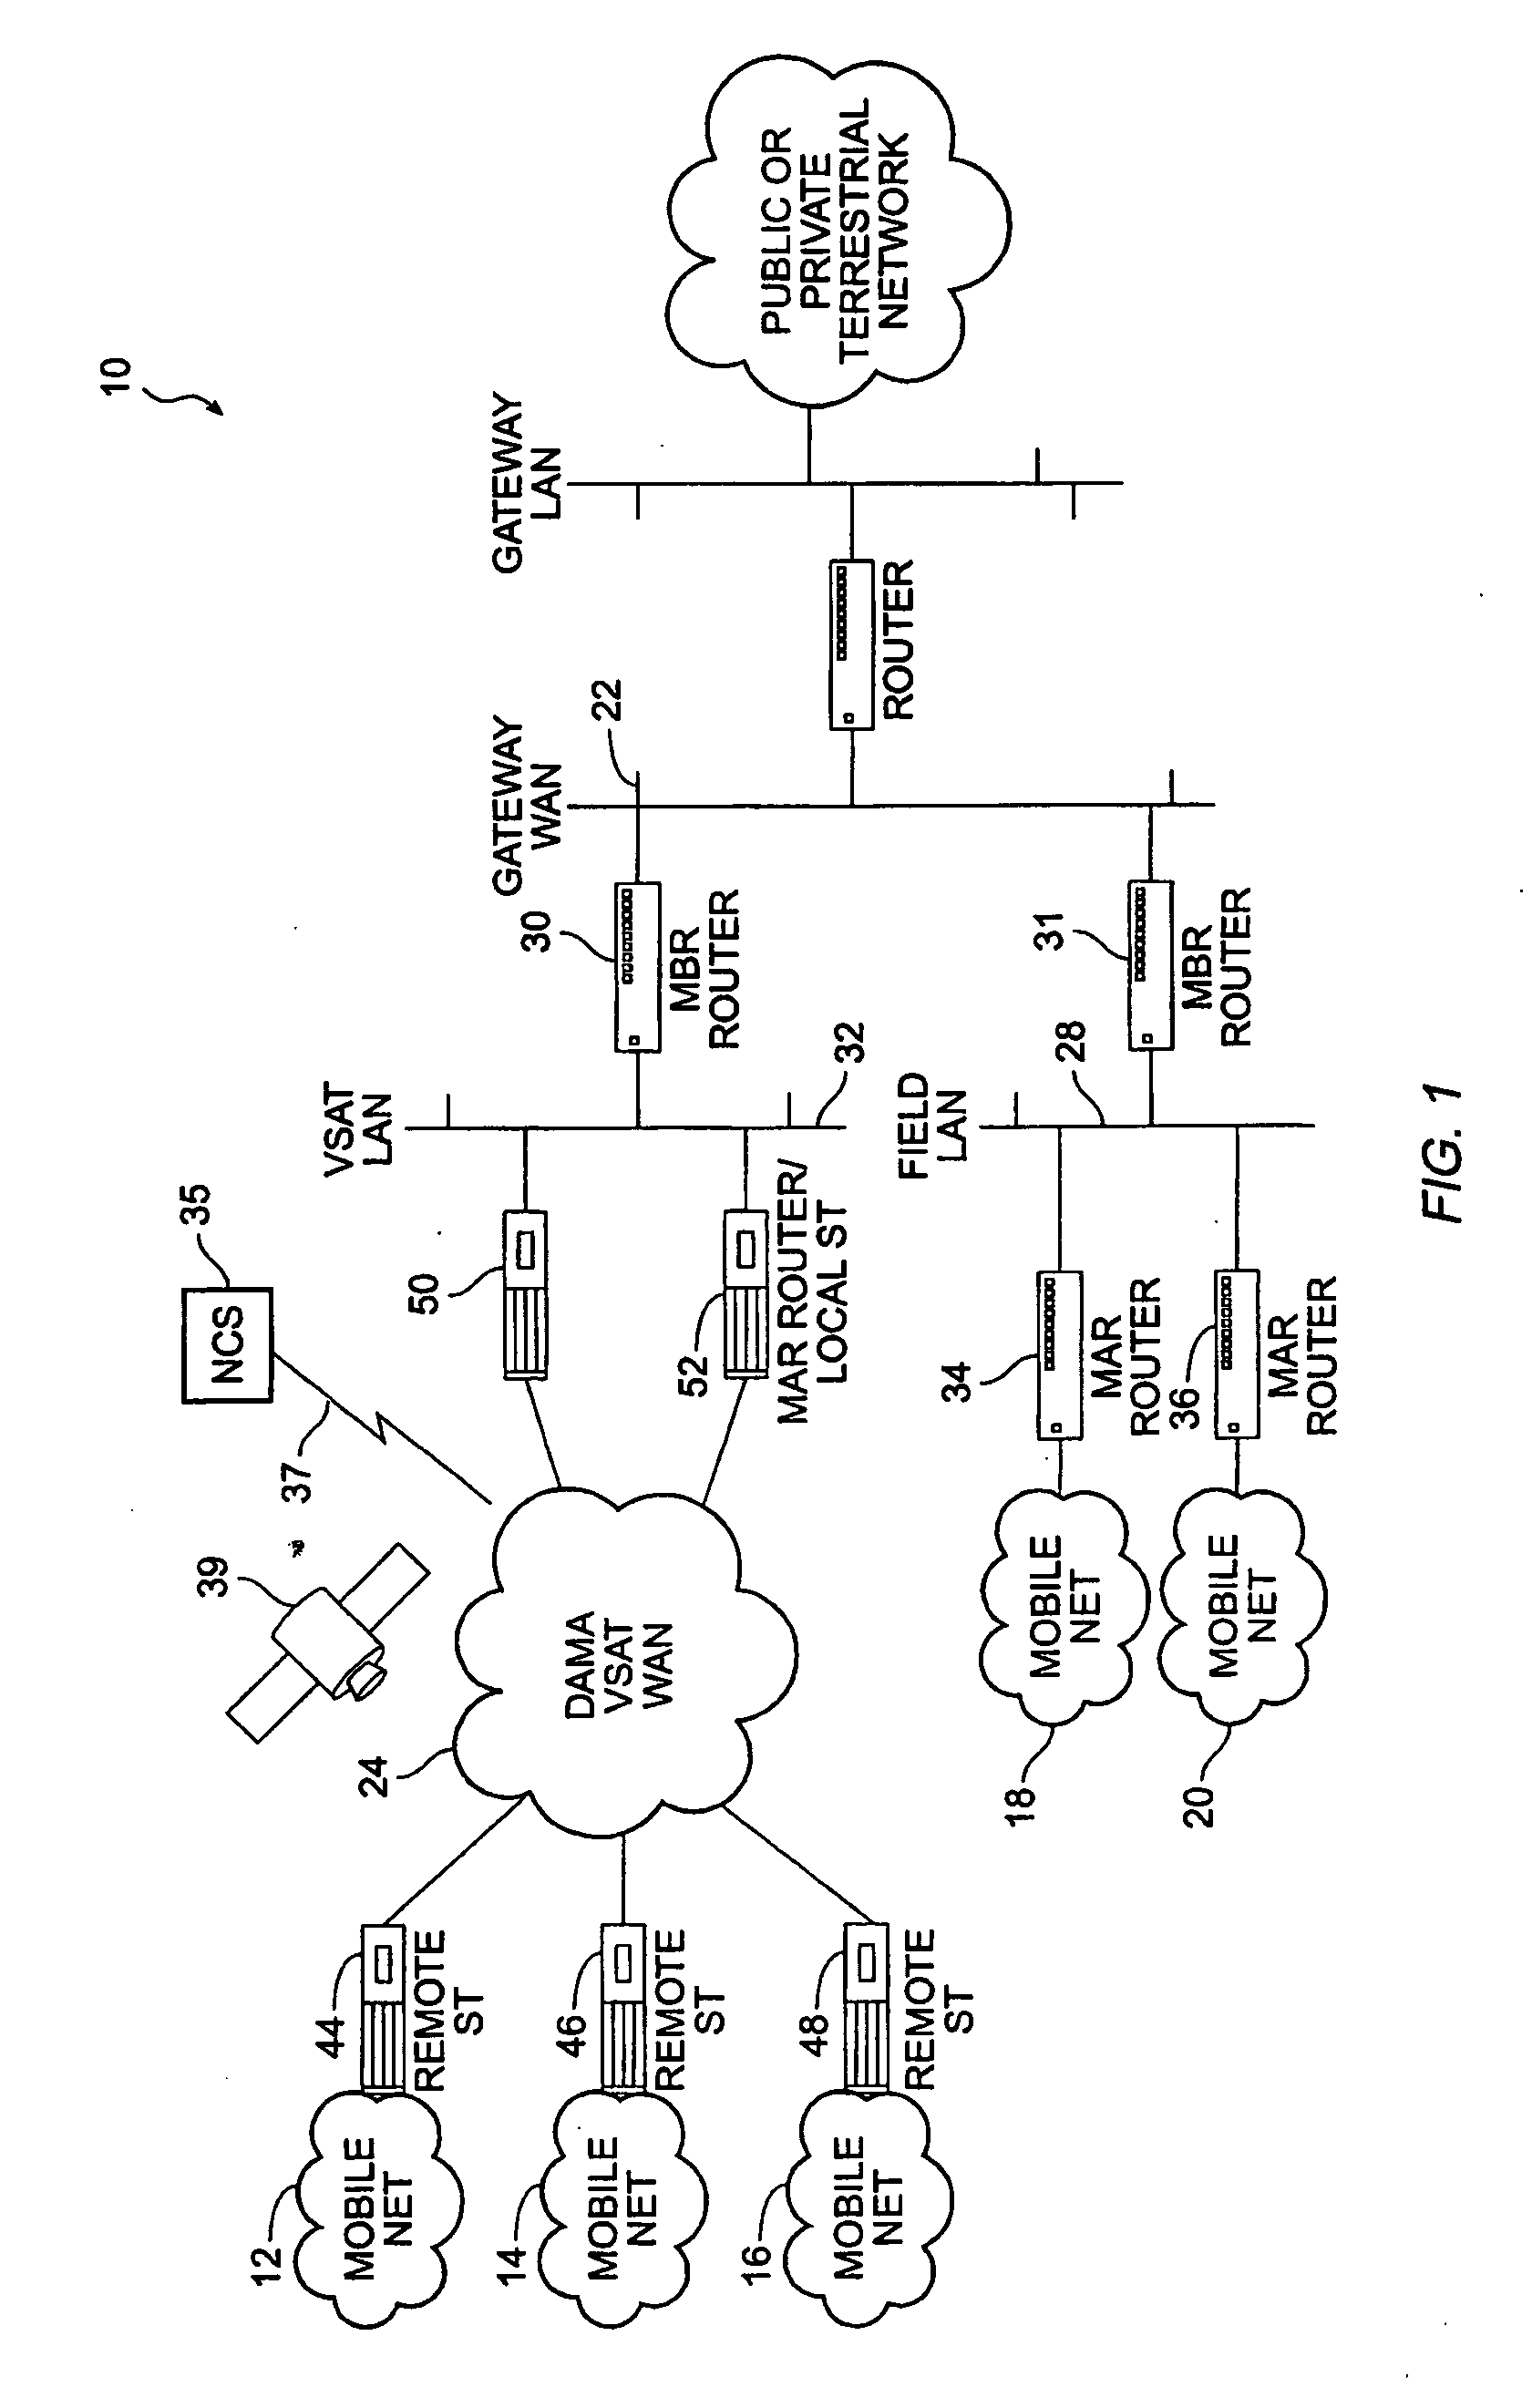 Satellite routing protocol with dynamic IP addressing